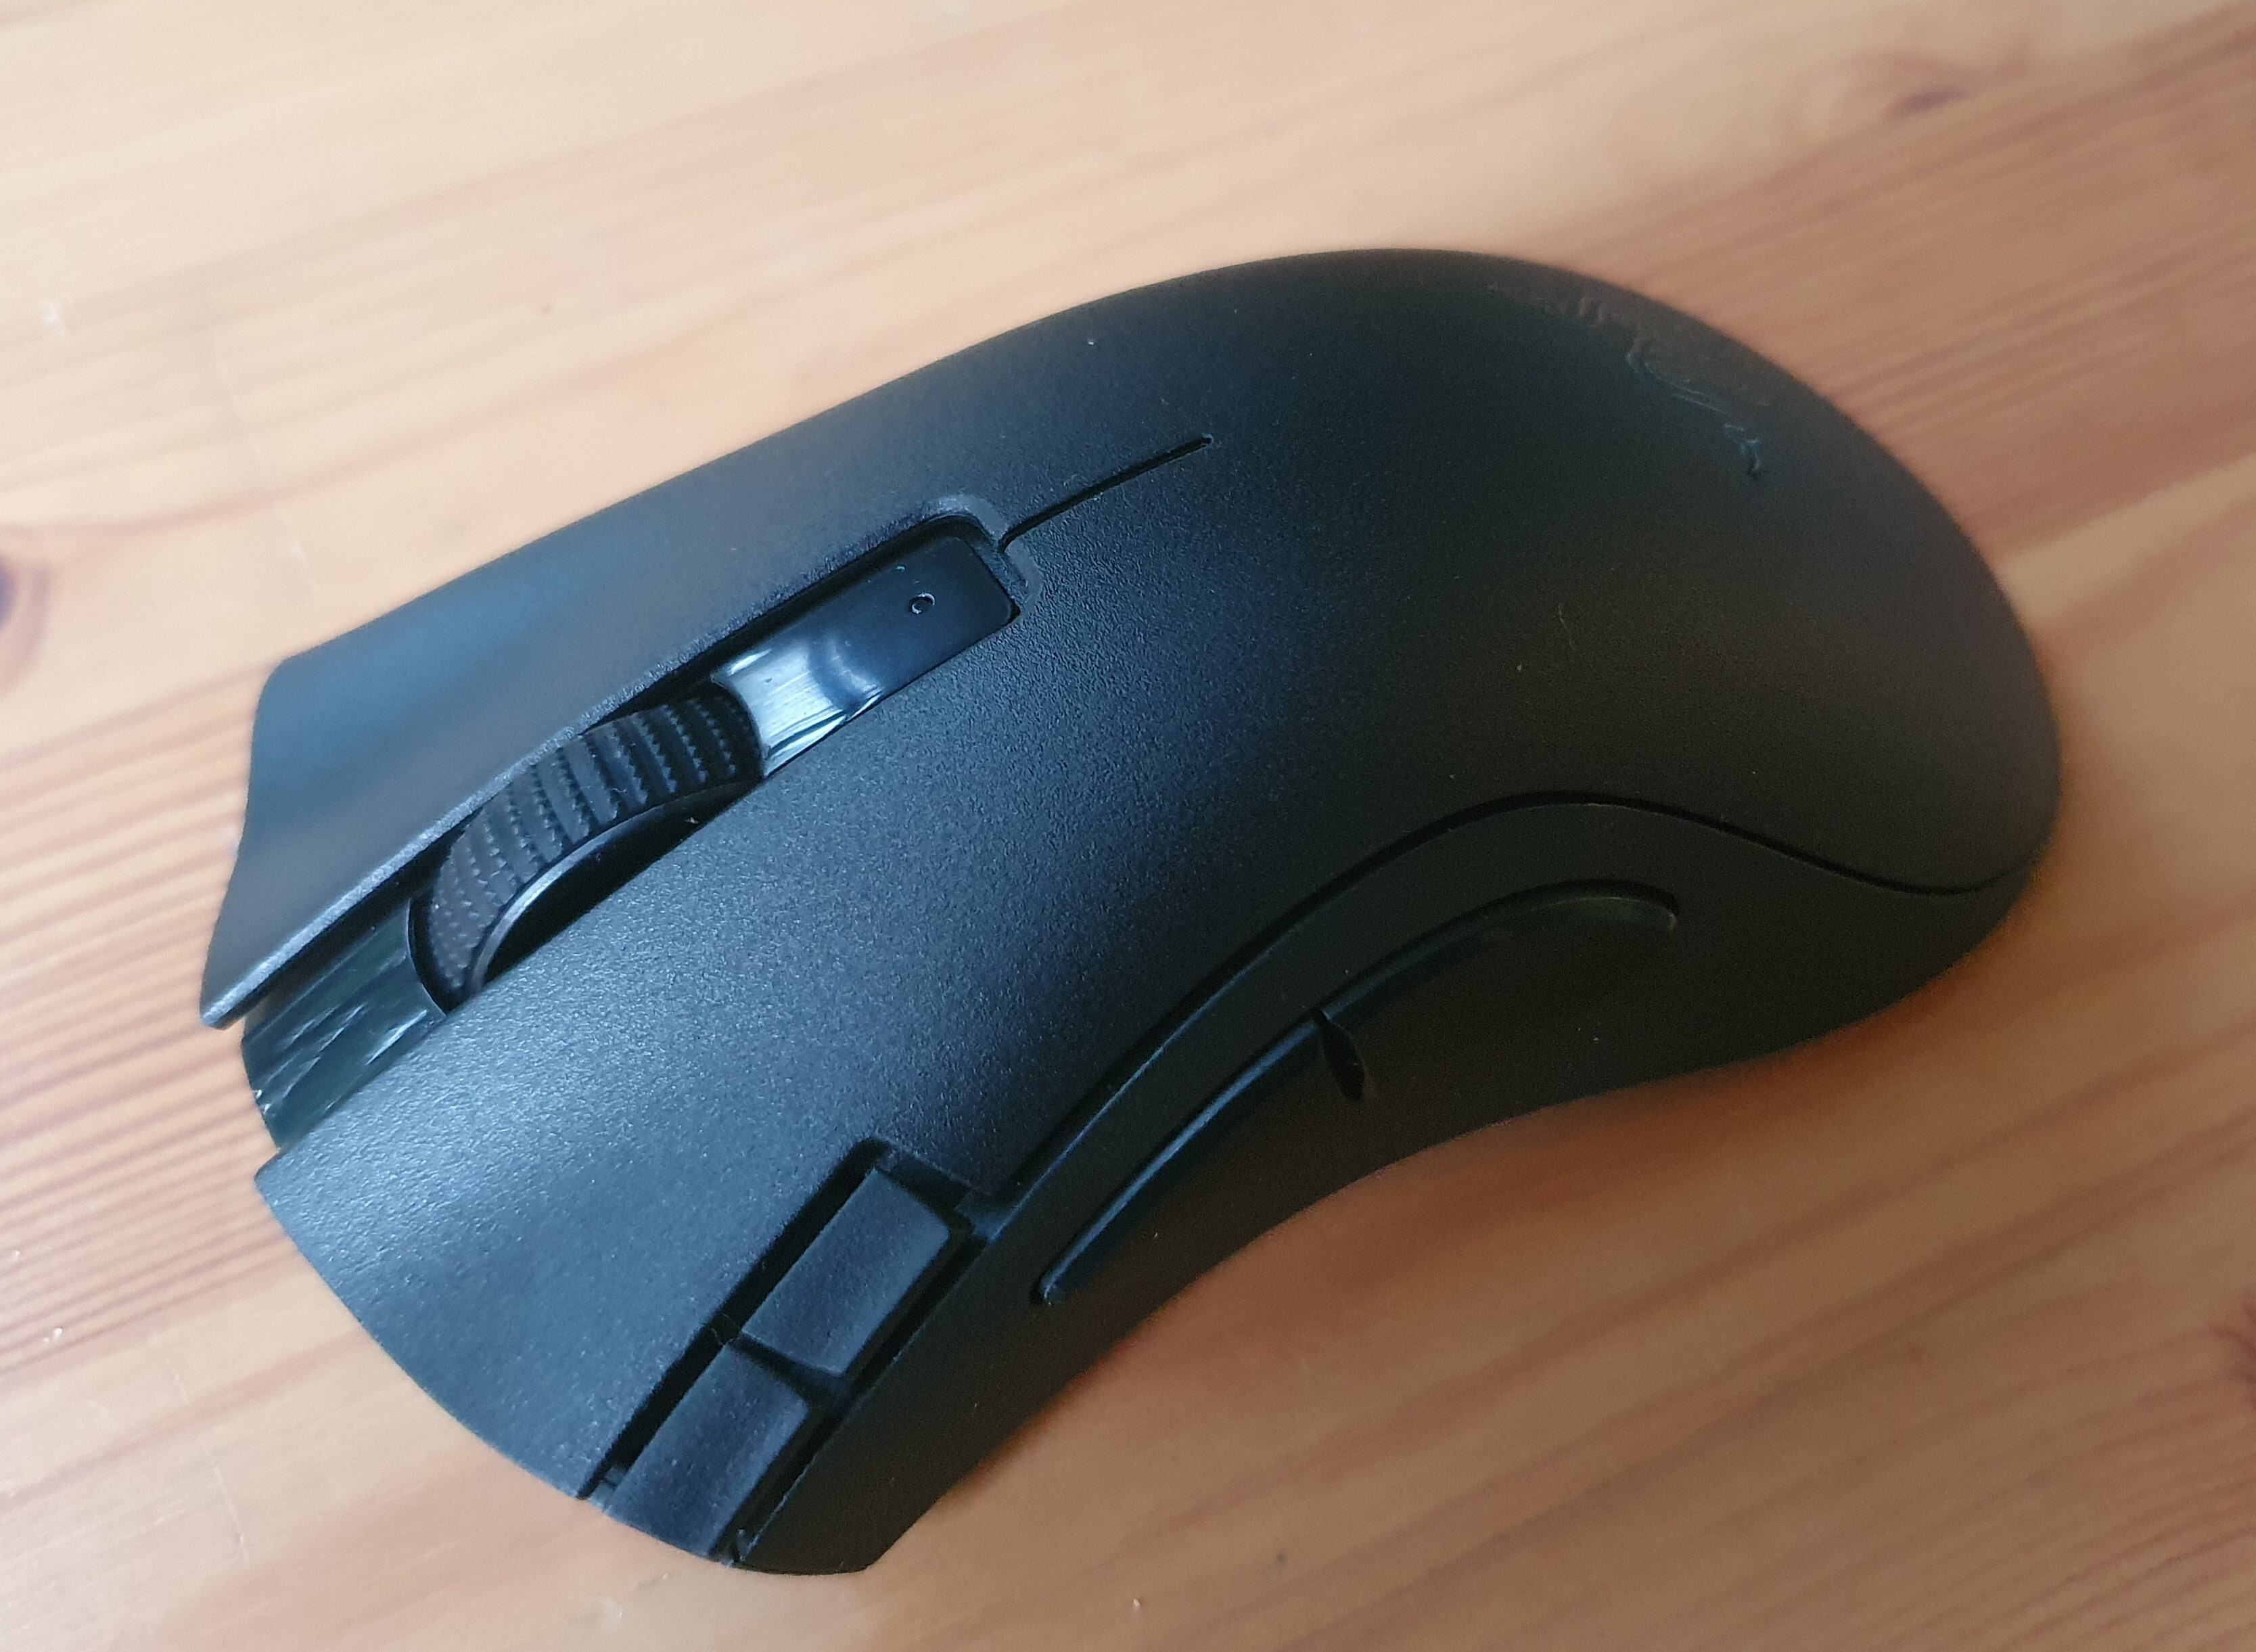  Razer DeathAdder V2 X Hyperspeed  - Best dual-purpose gaming and productivity mouse